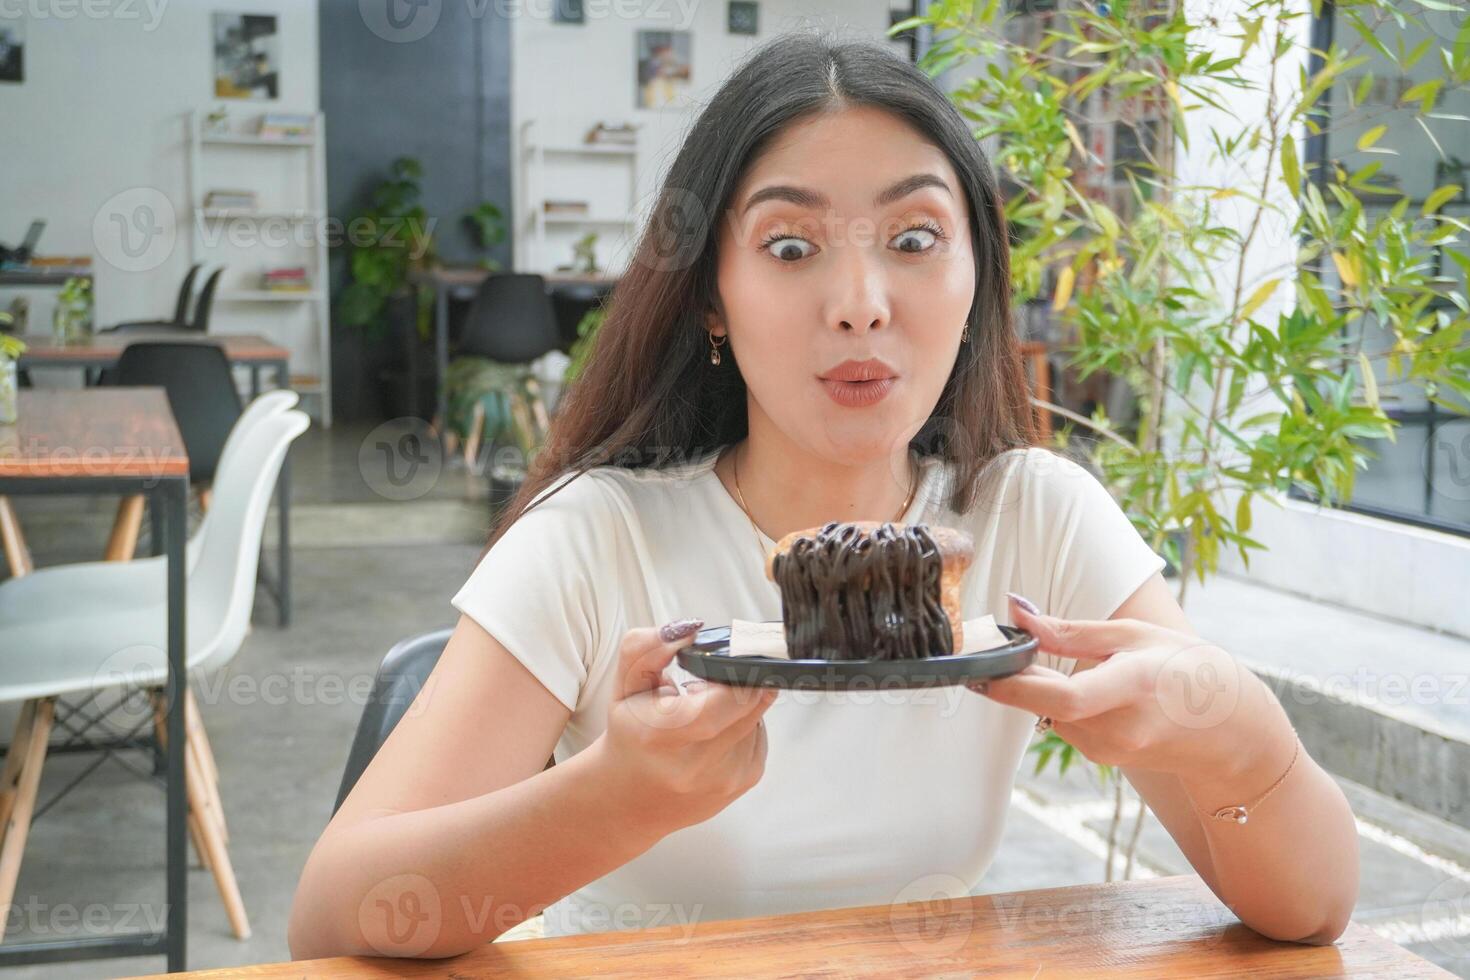 Surprised Asian young woman holding dougnut pastry named cromboloni with shocked and amazed expression, sitting in a coffeeshop with plants decoration photo